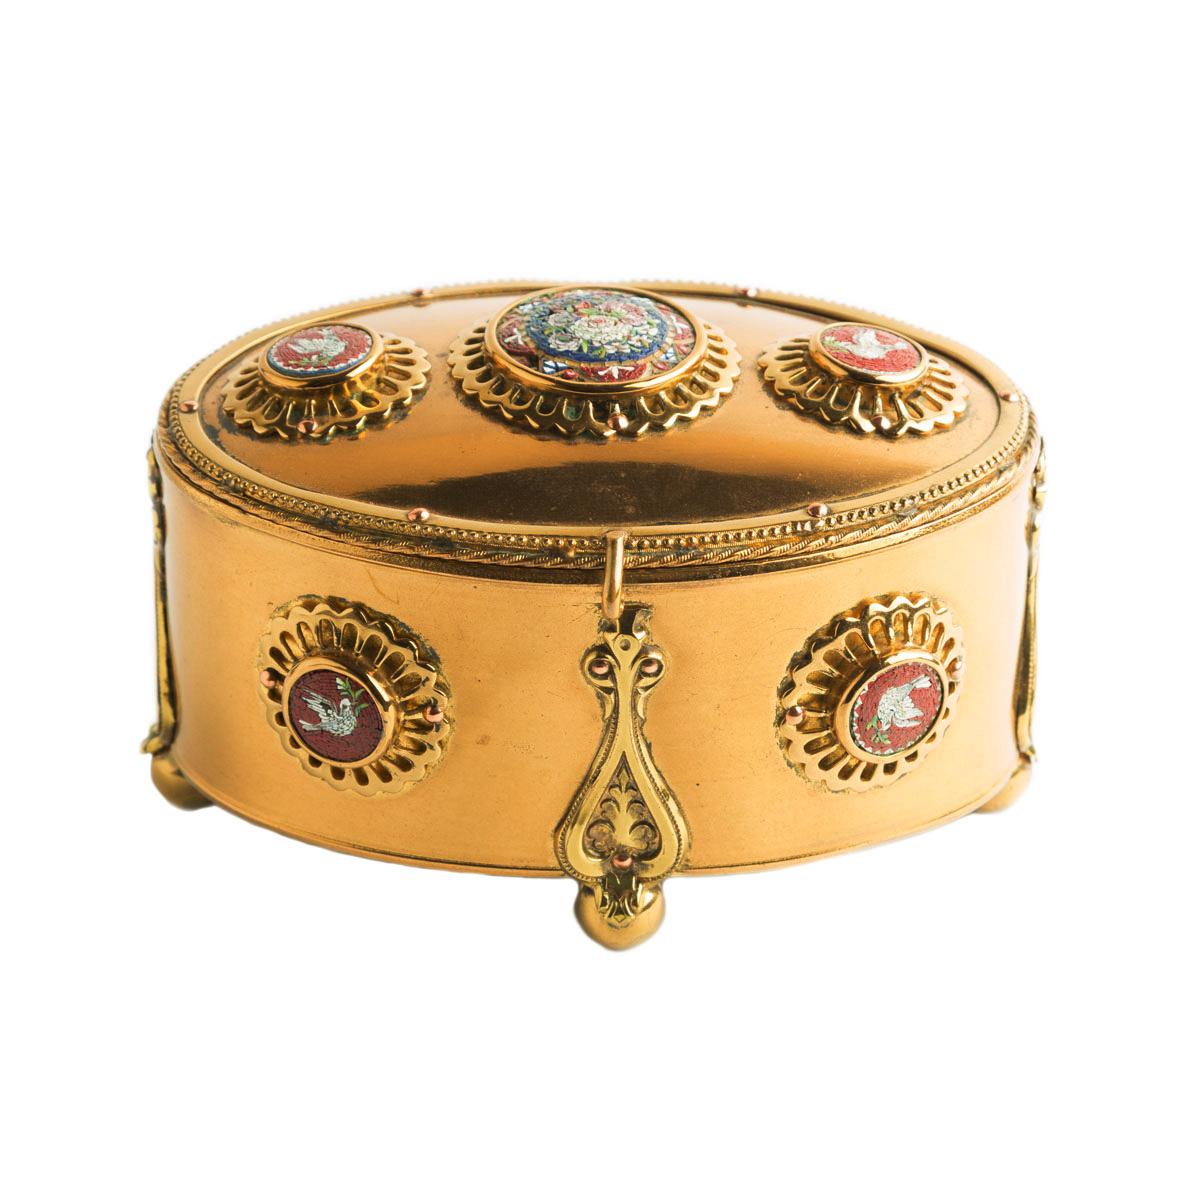 Rare jewelry box in golden metal with Roman micromosaics depicting flowers and doves. The micromosaic was born in Rome in the last quarter of the 18th century, also called the minute mosaic, the micromosaic technique originated within the Vatican